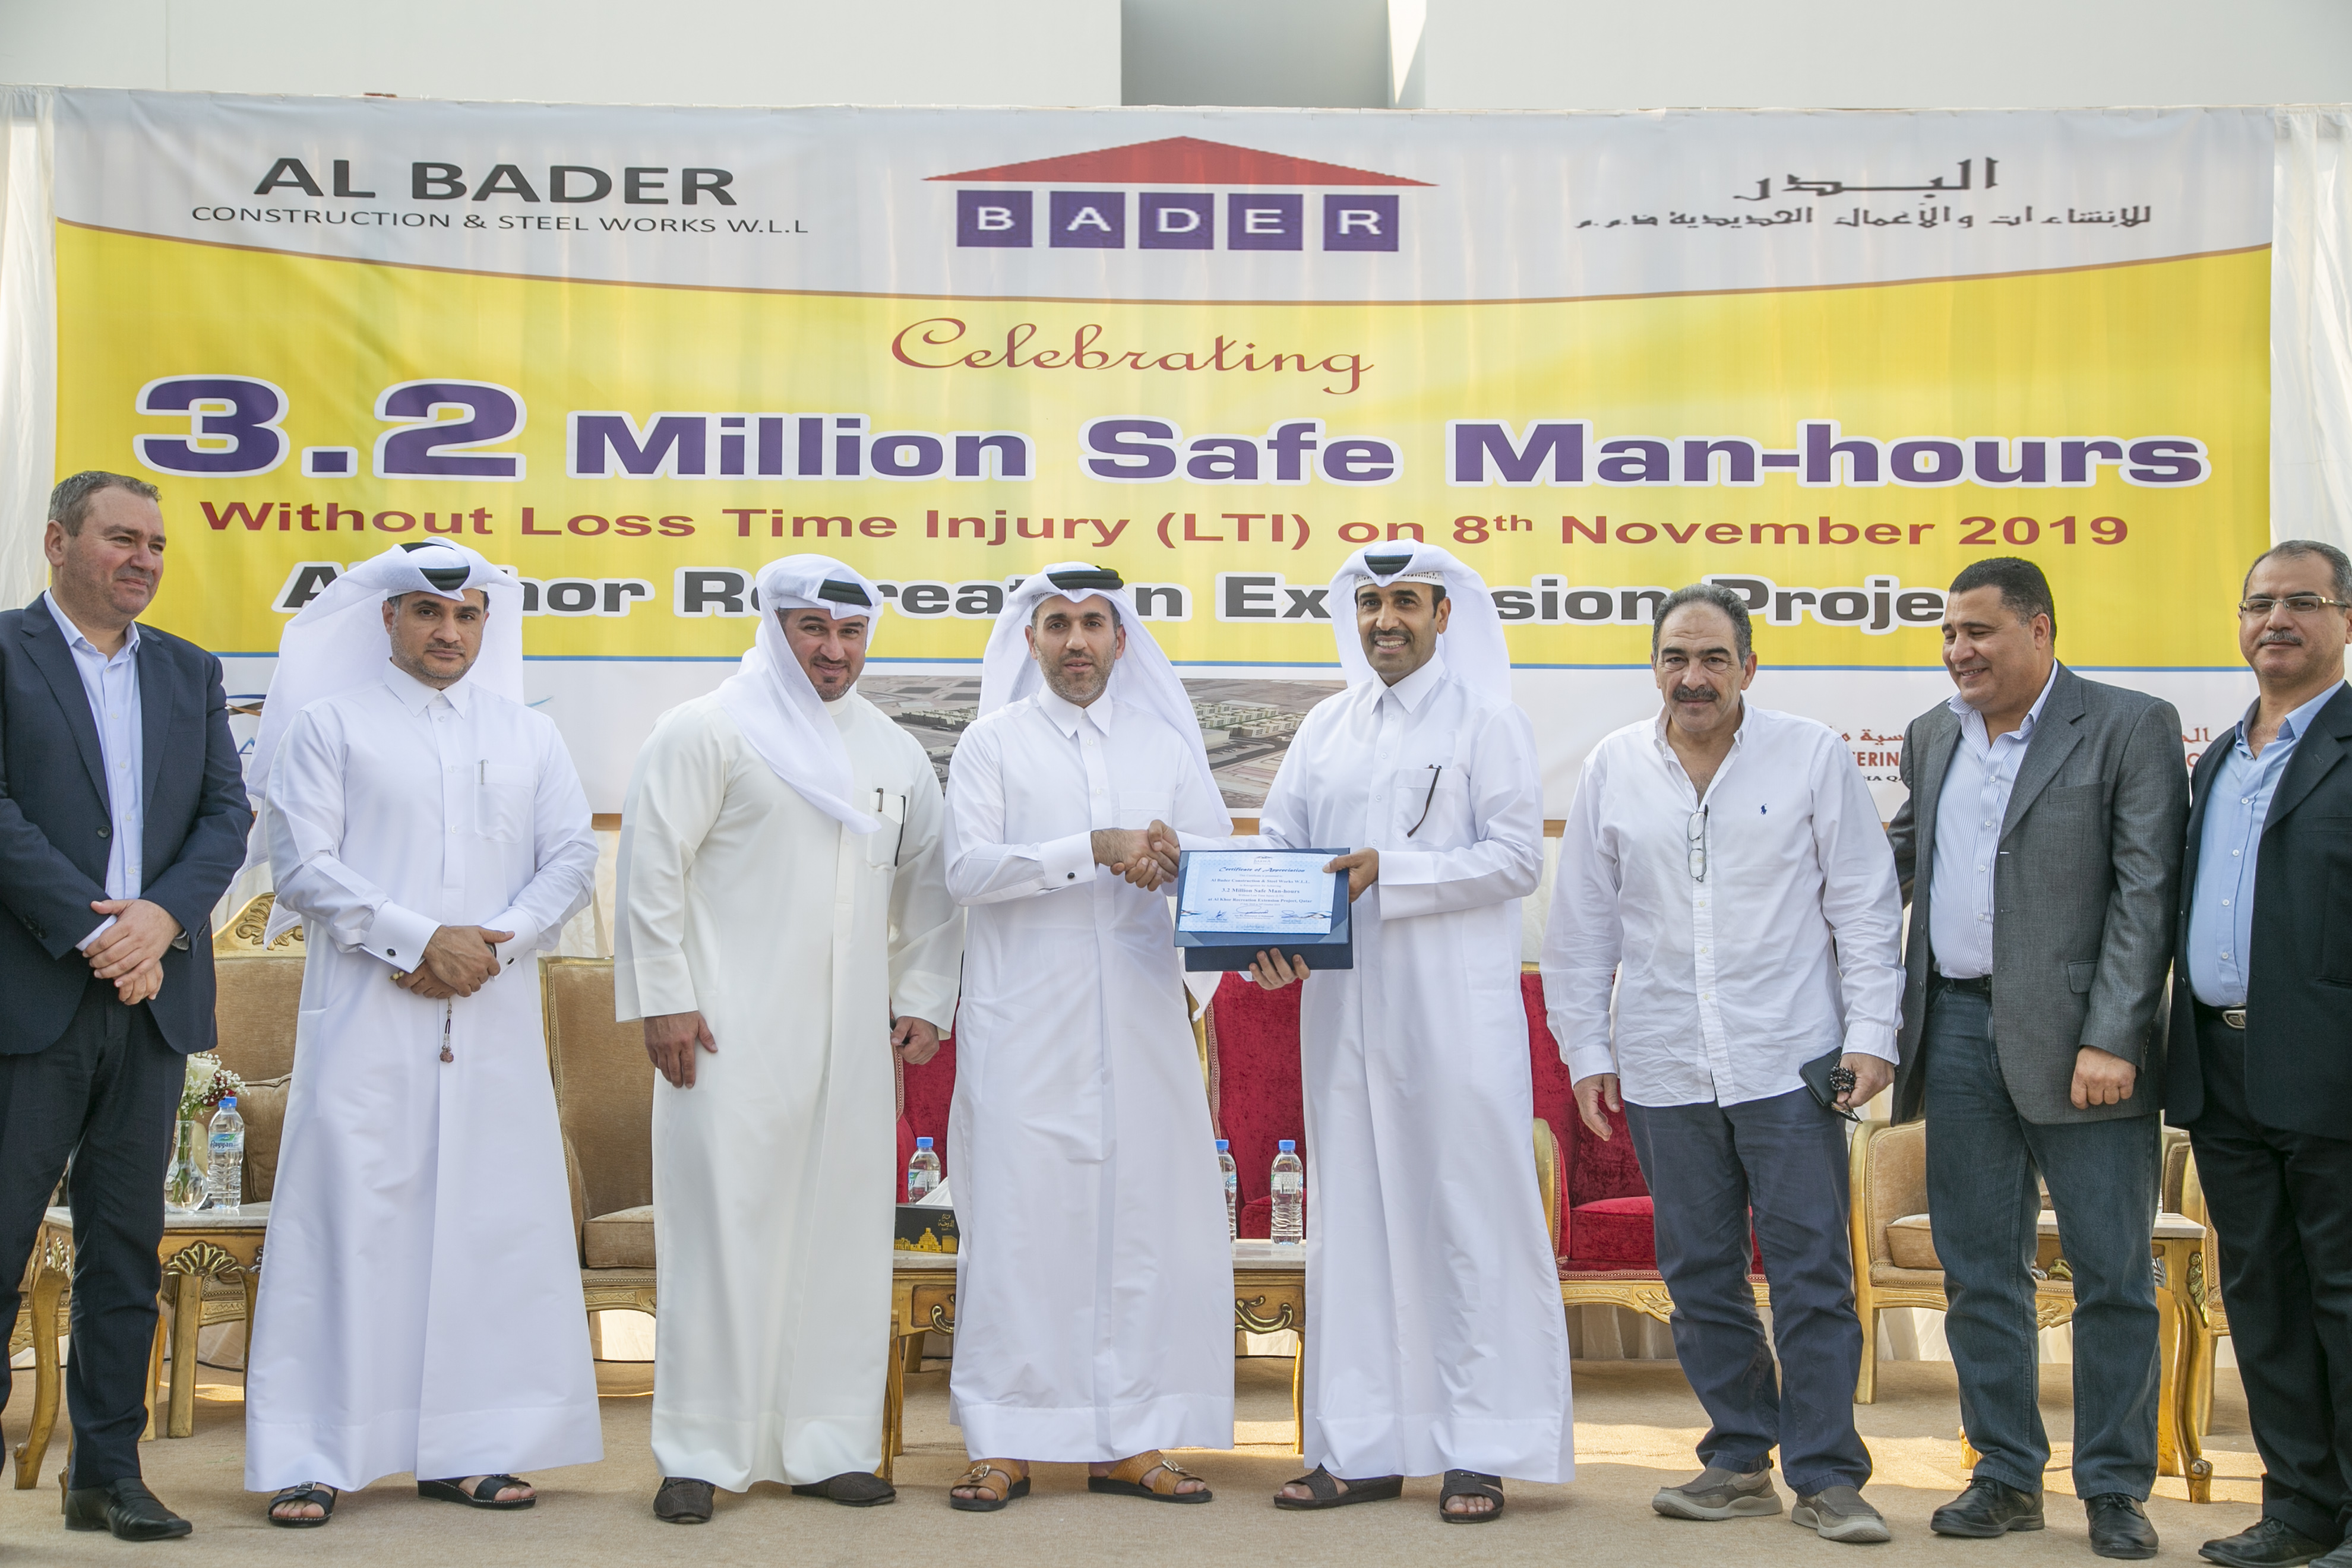 Al Khor Recreation Extension Project Achieves 3.2 Million Safe Man Hours Without Lost Time Injury